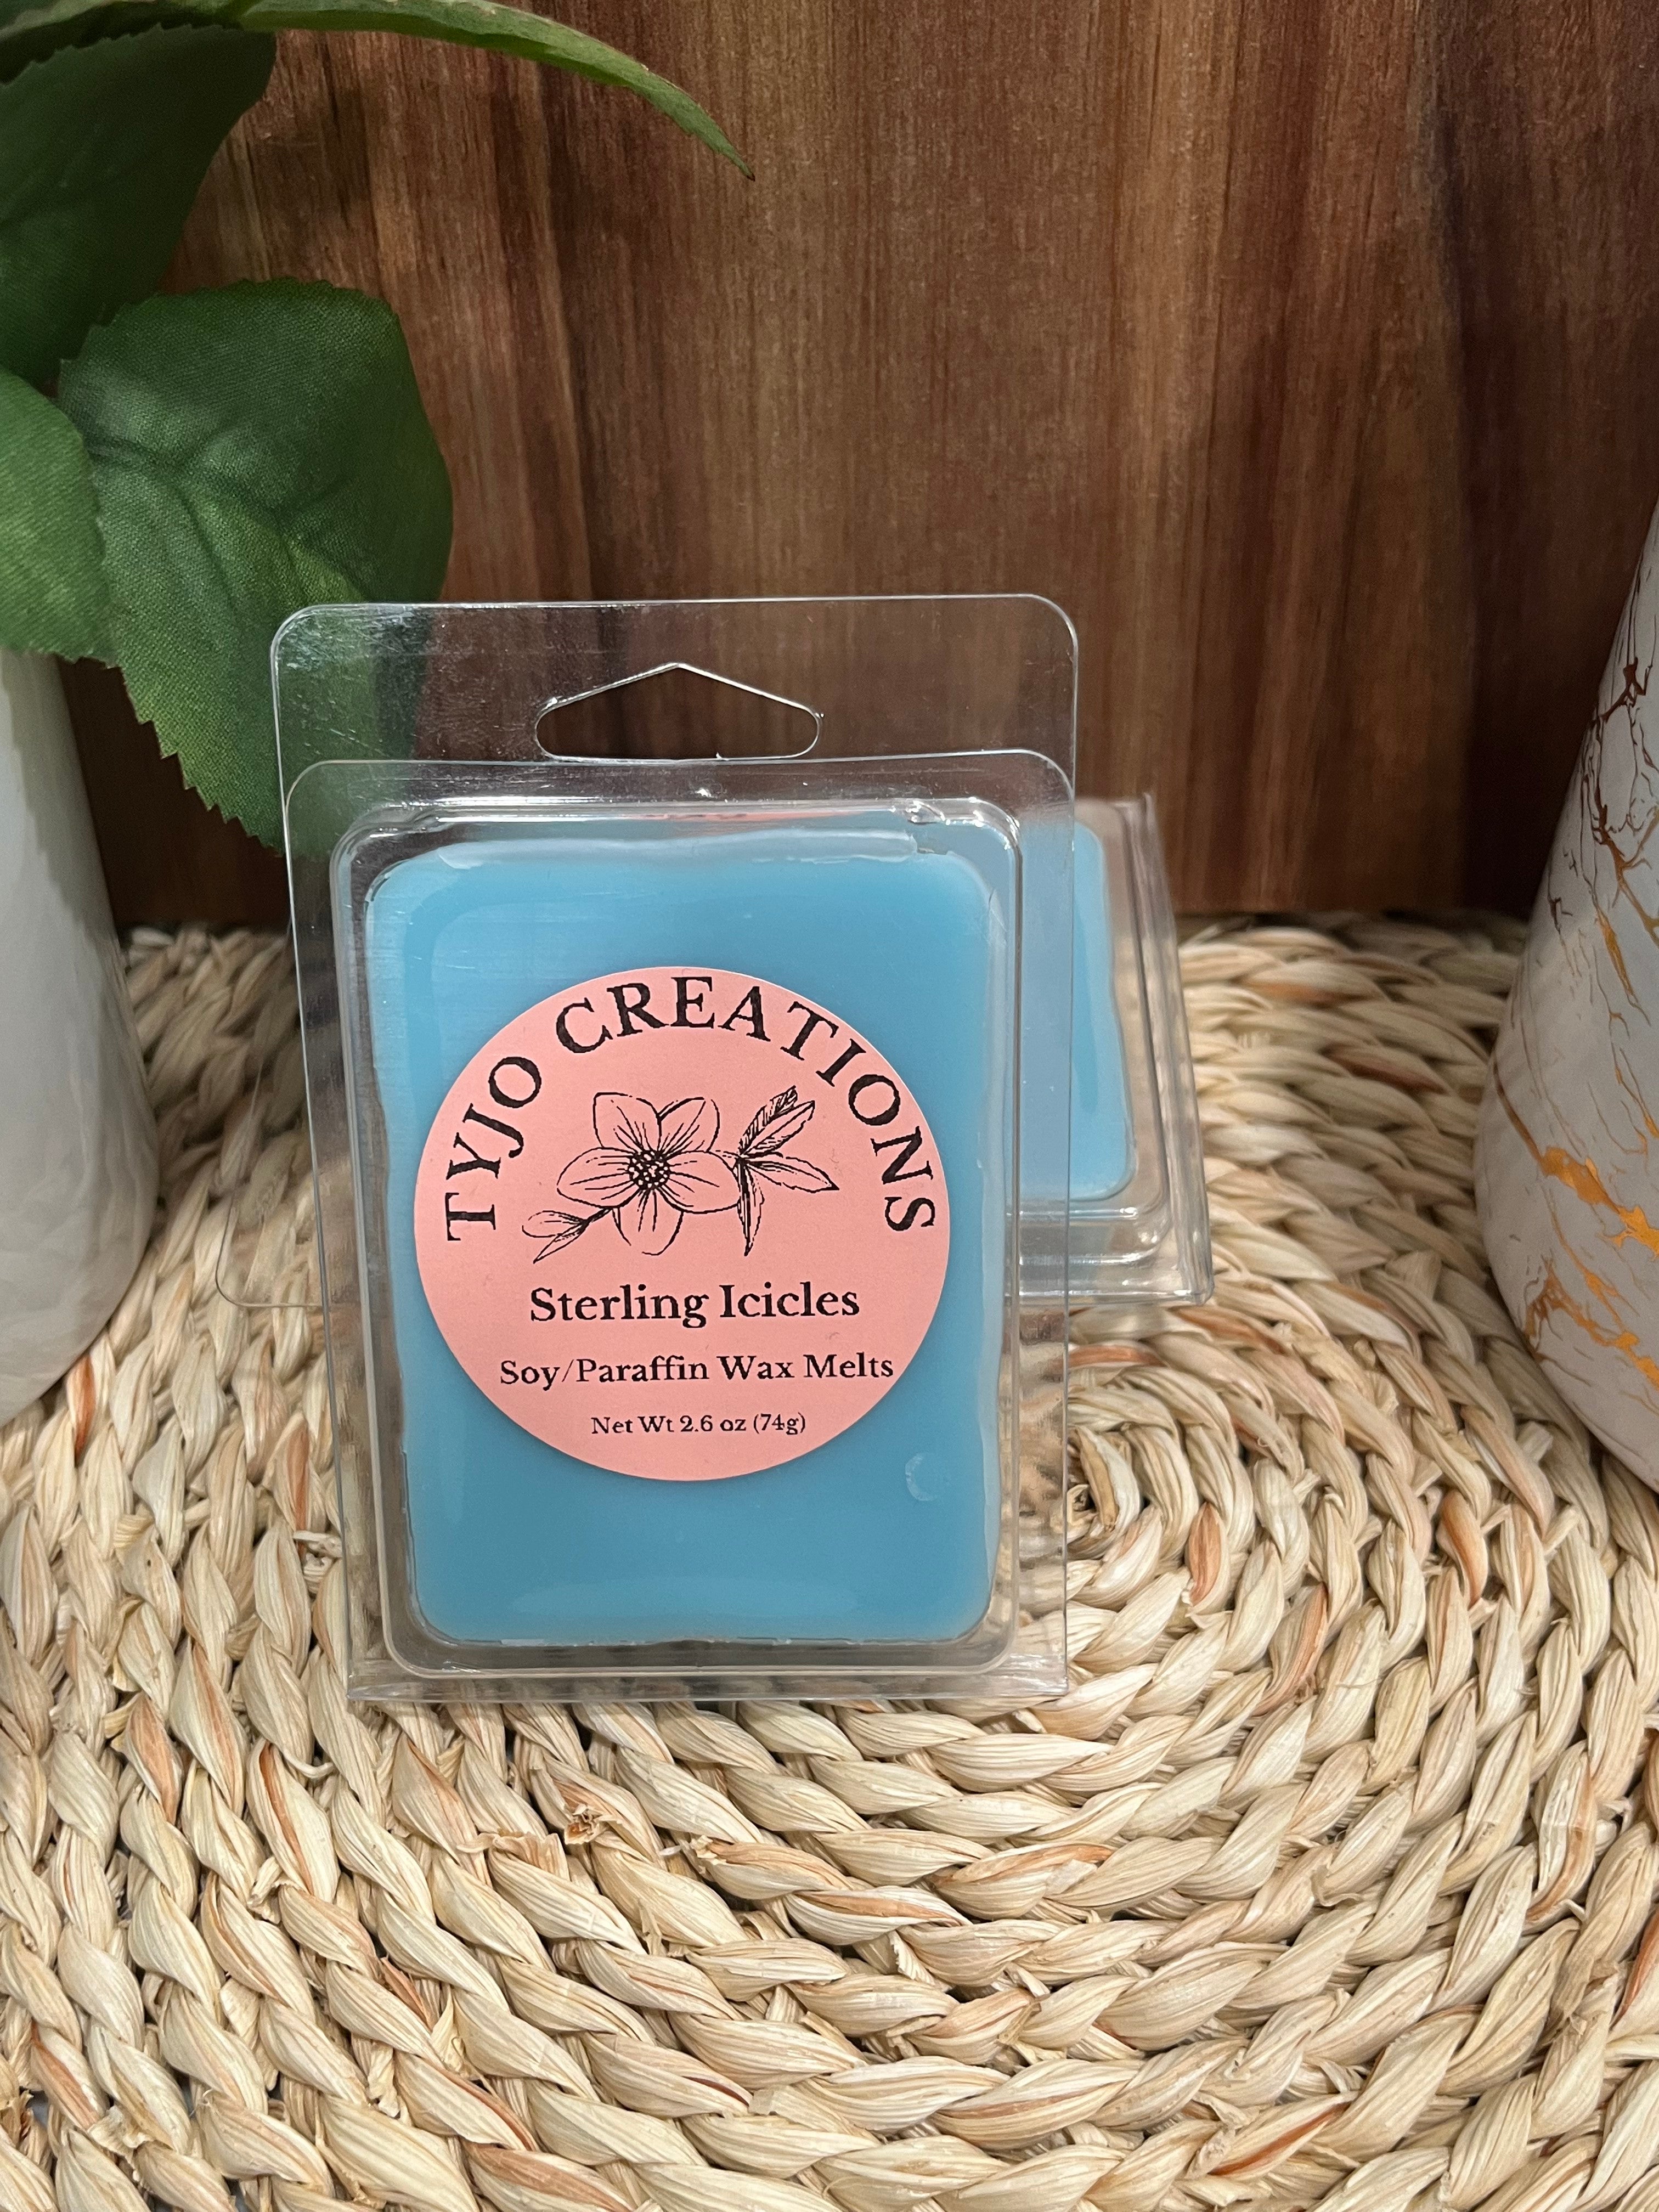 The Jelly Wax Co Hand Poured Soy Wax Melts From Essex.